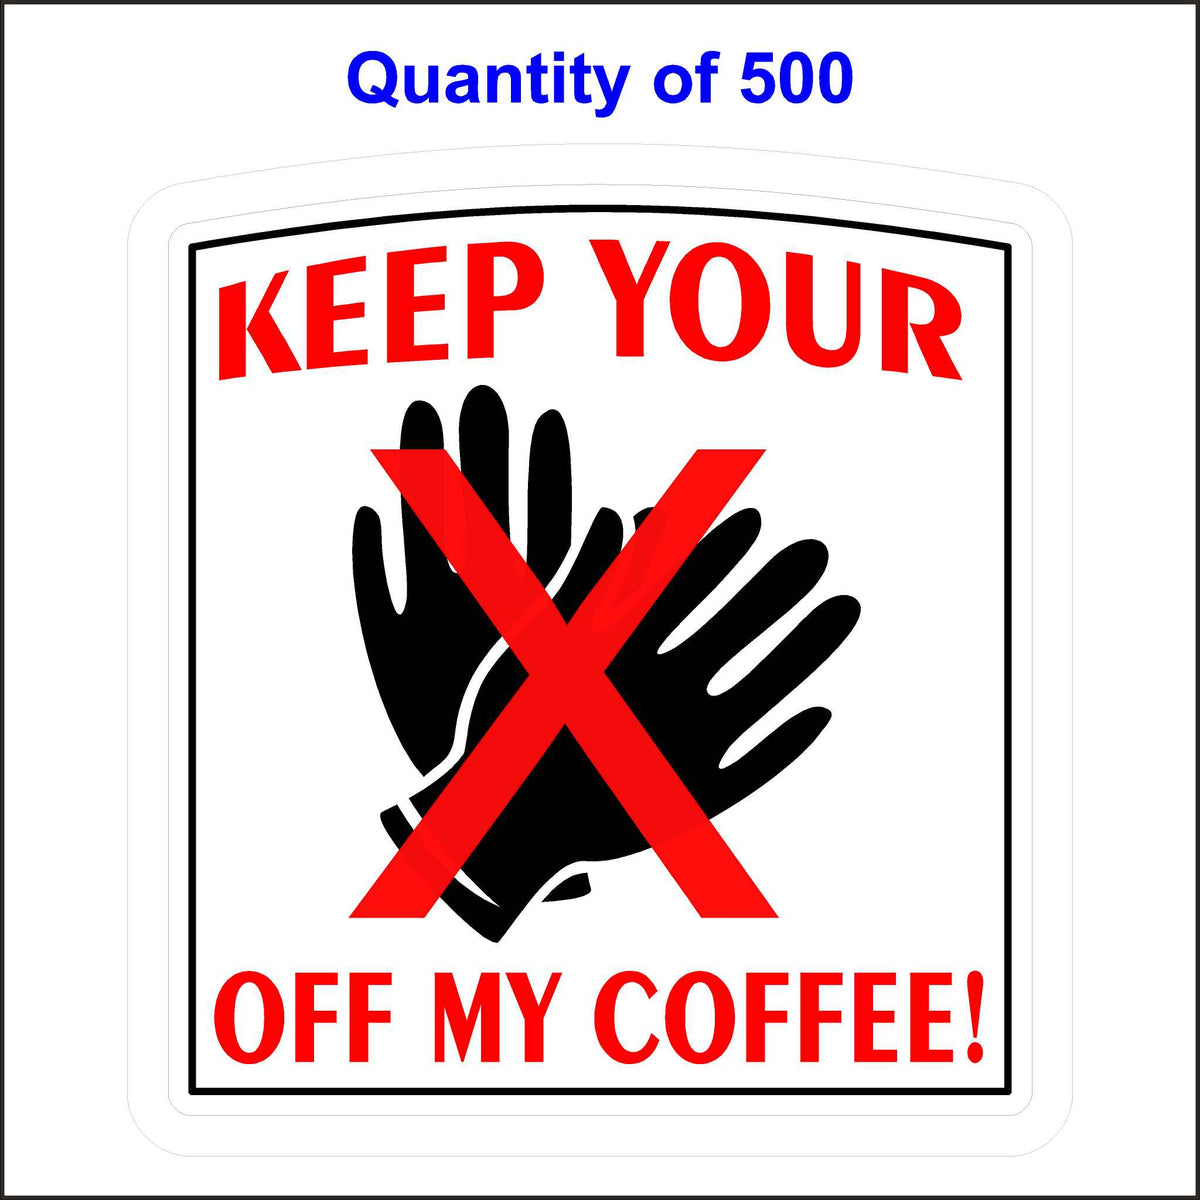 Keep Your Hands Off My Coffee Sticker. 500 Quantity.